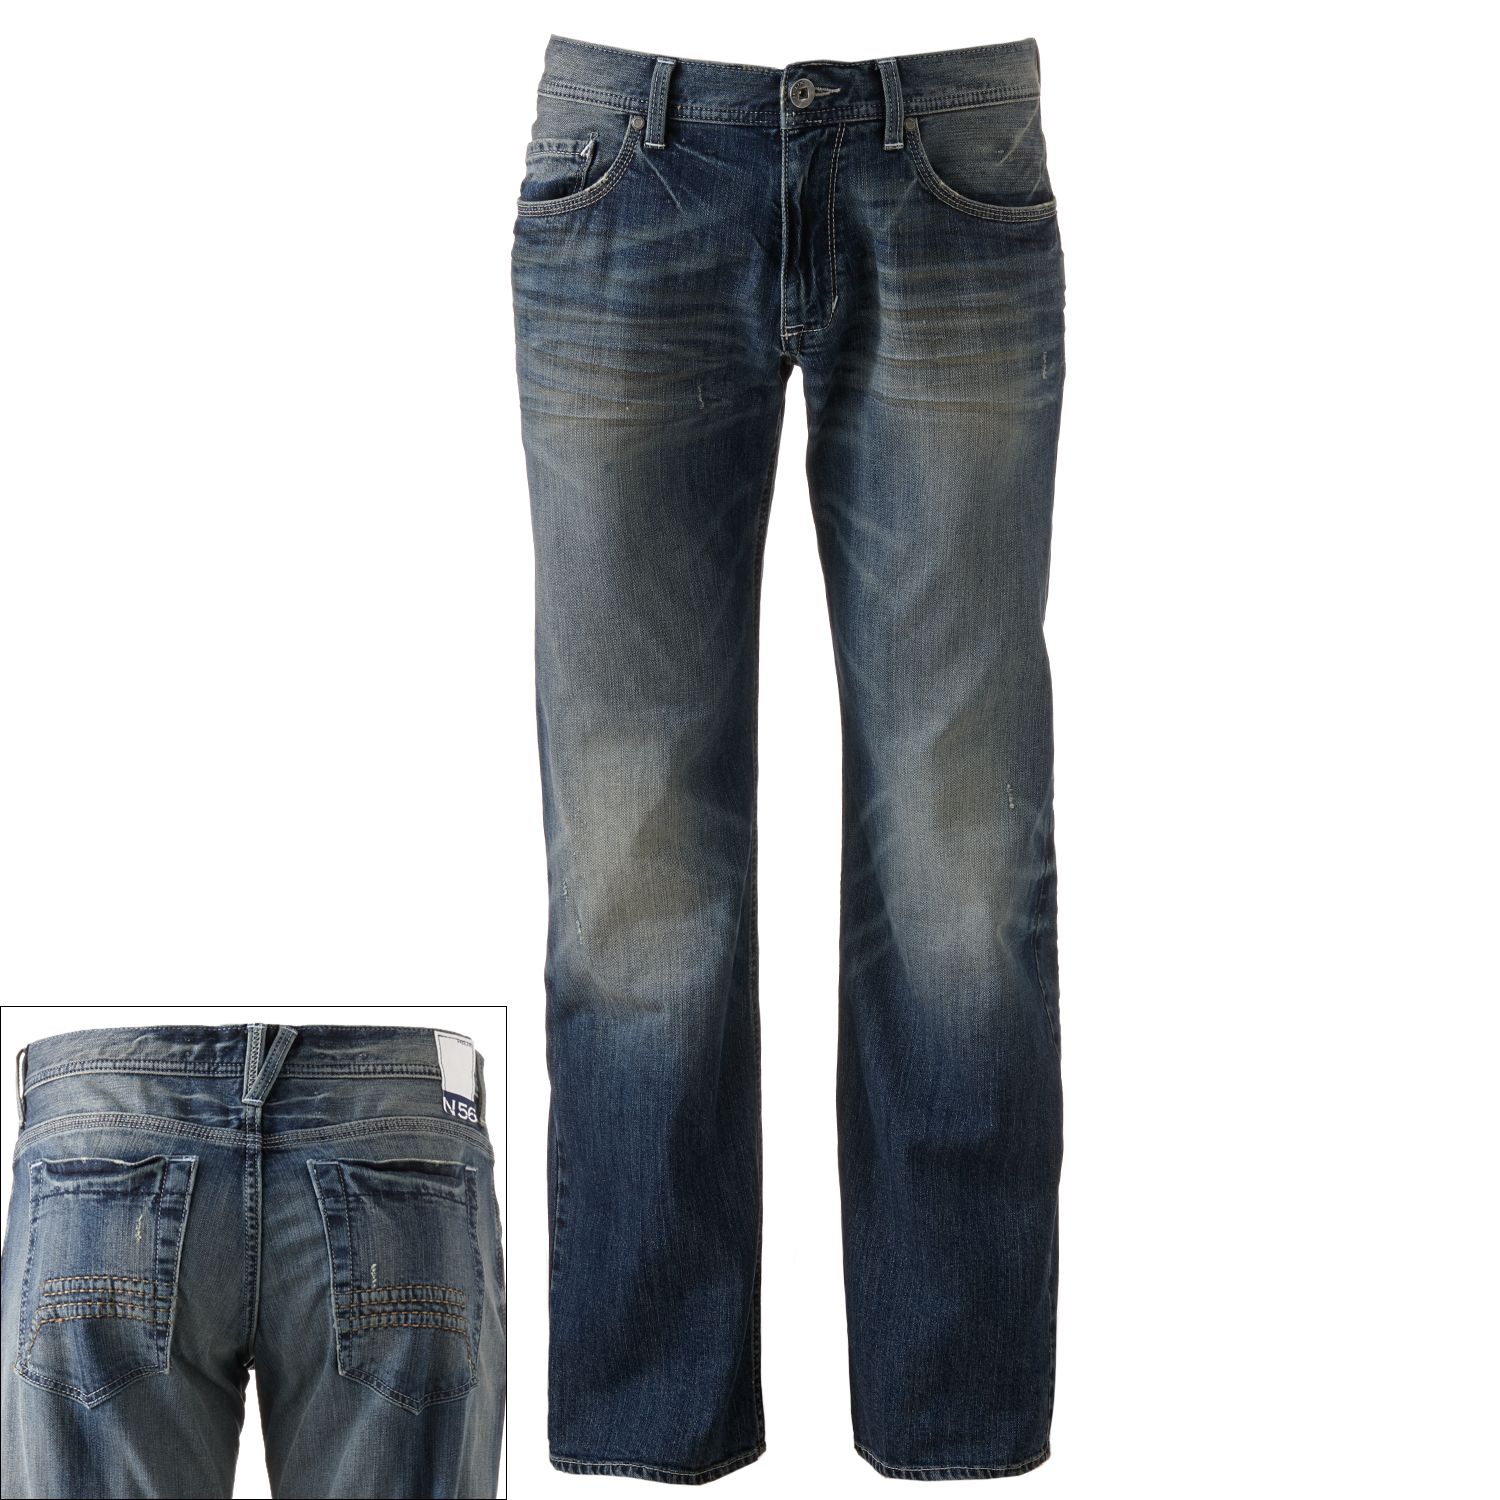 helix bootcut jeans